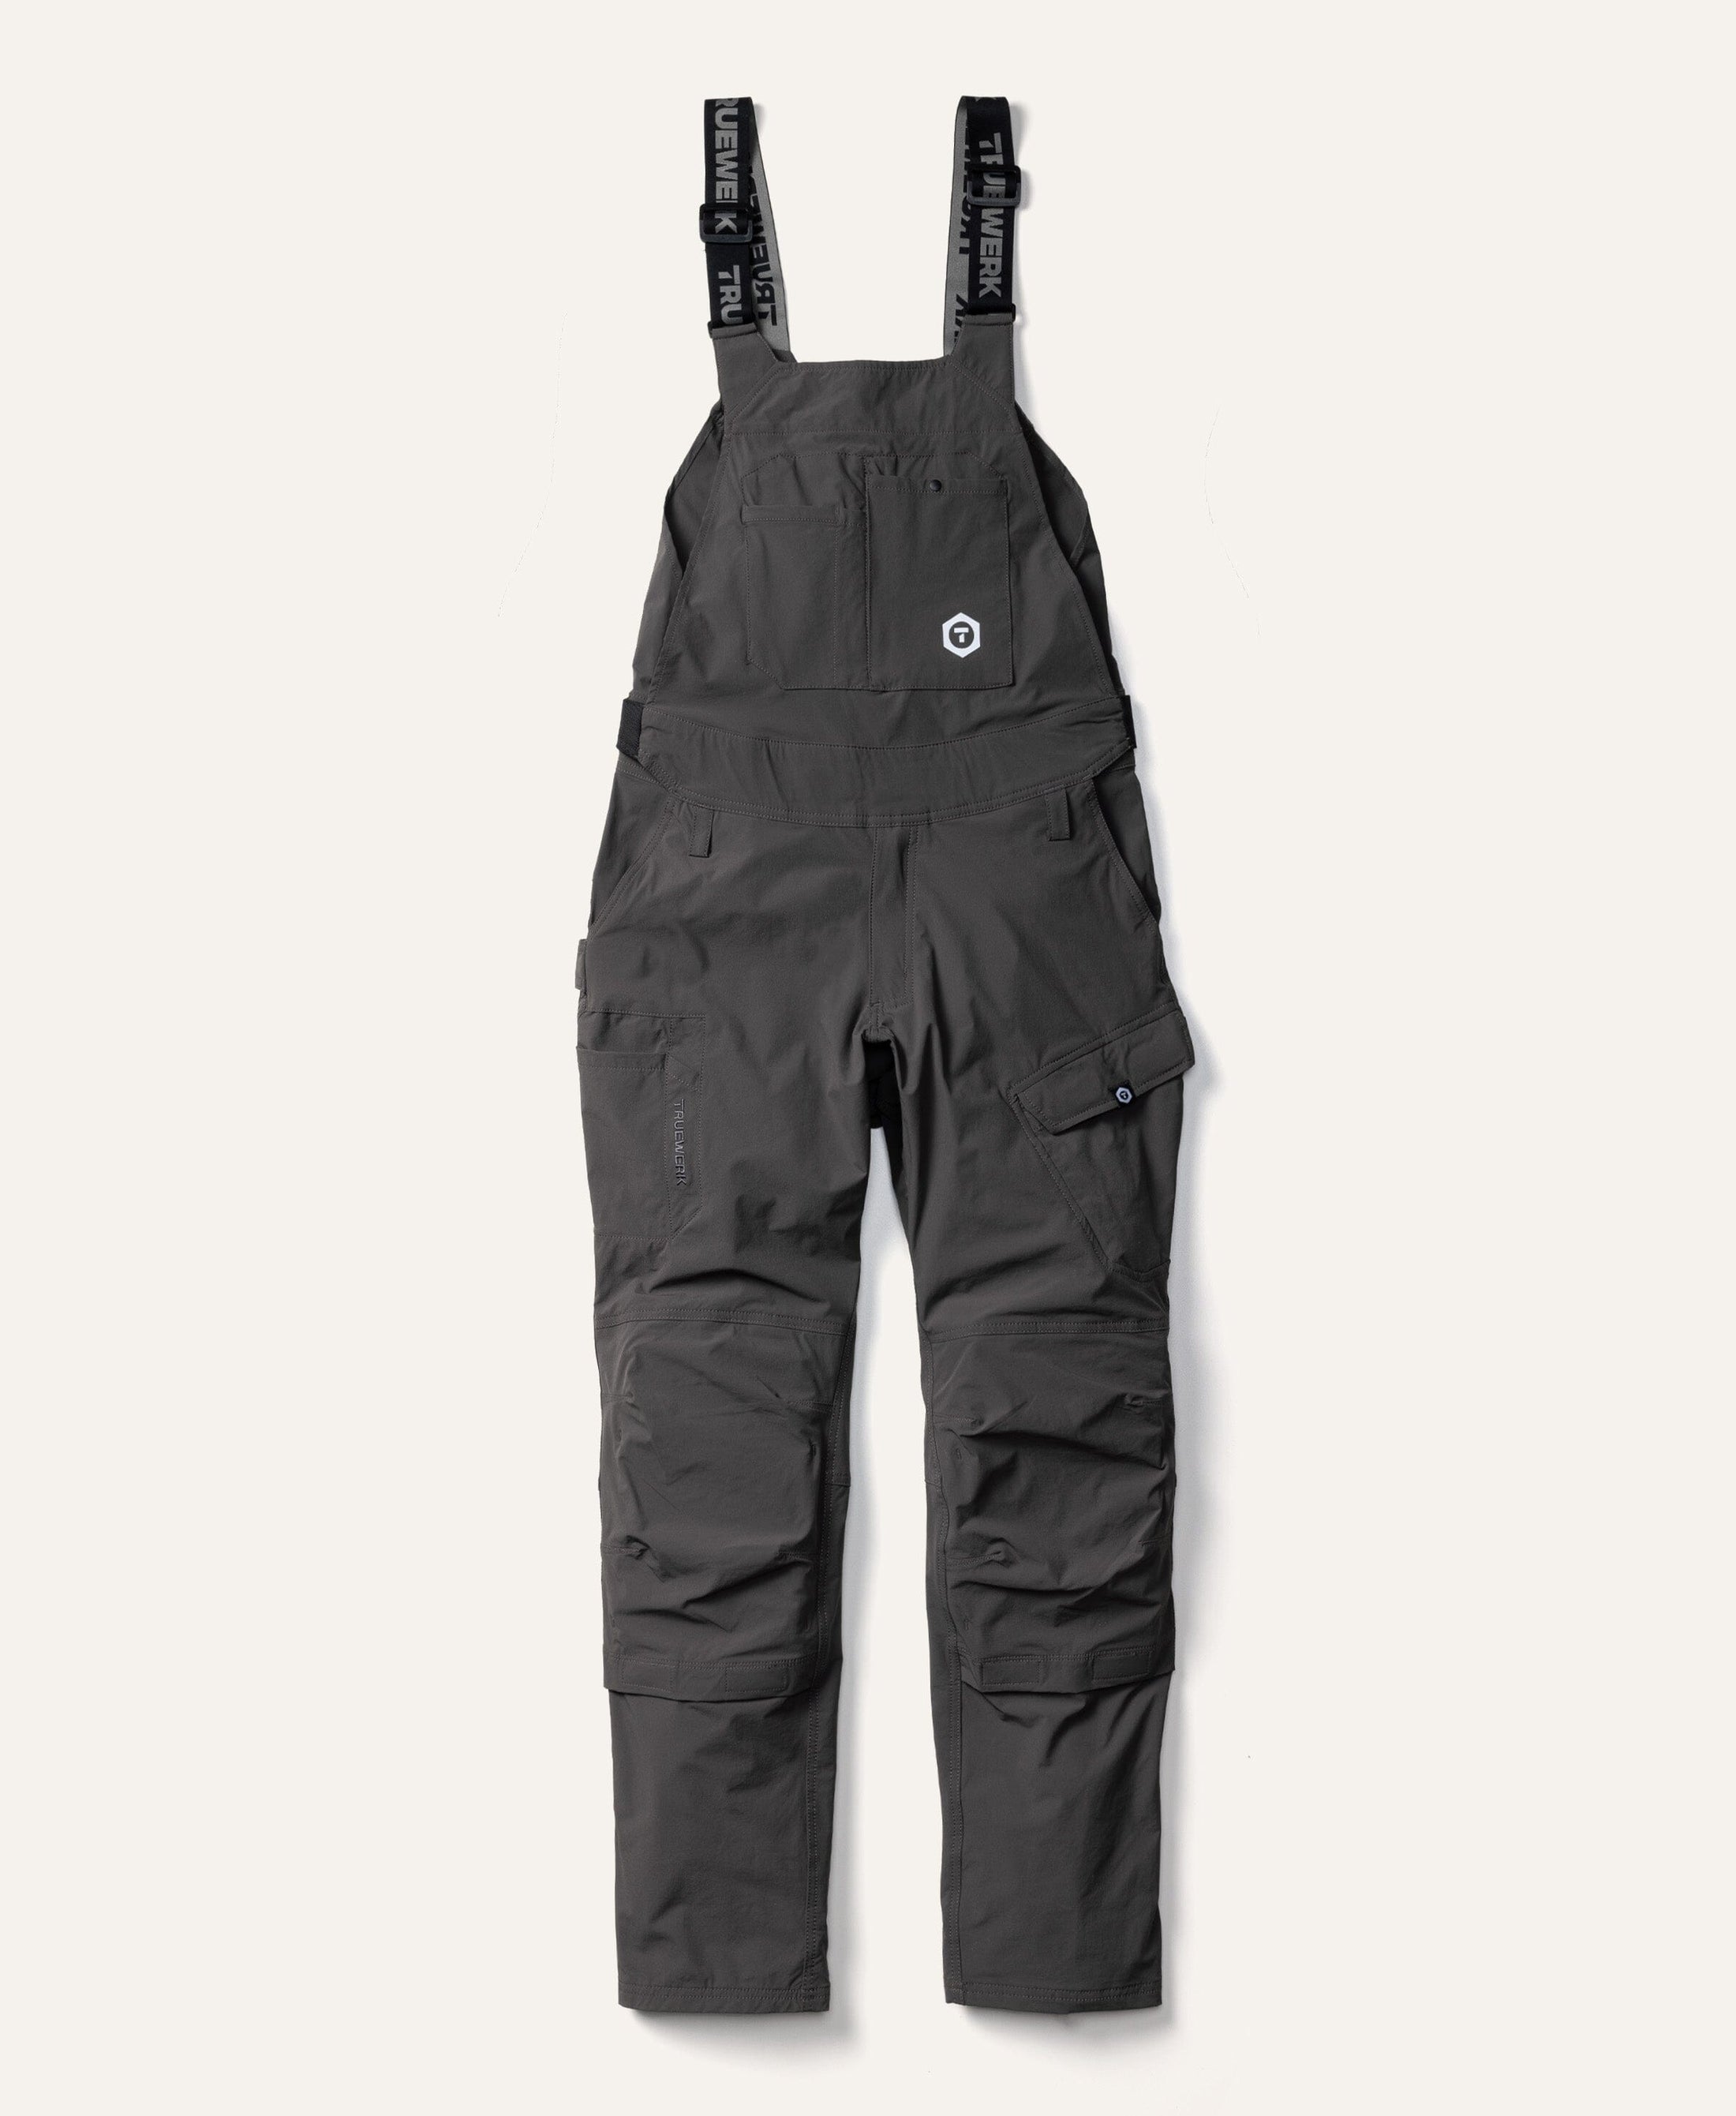 T1 Overalls with Knee Pads